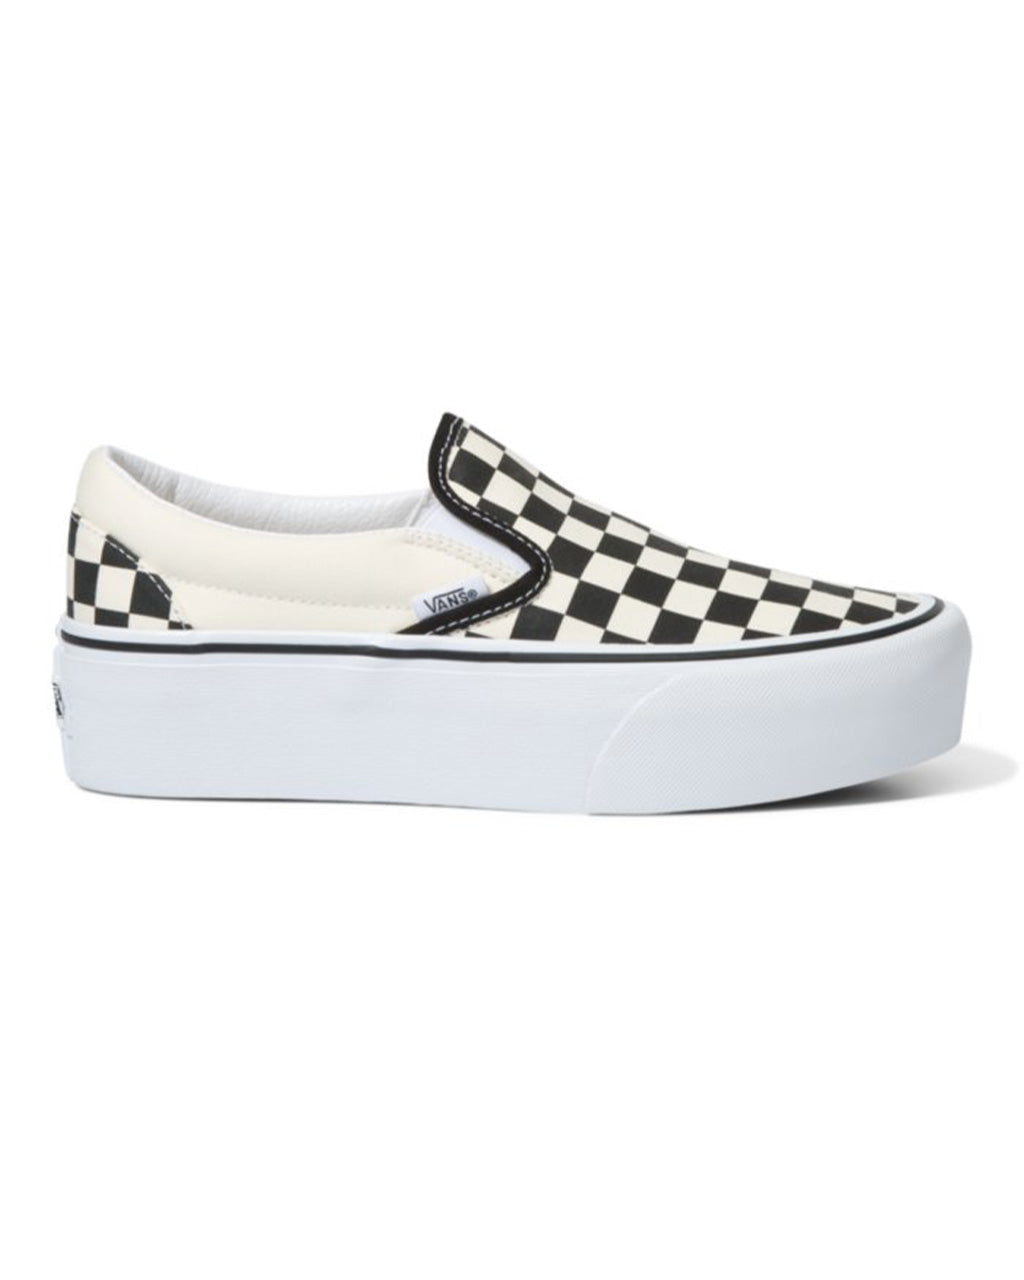 Vans Womens Classic Slip on Stackform - Shoes Black/White Size 08.5